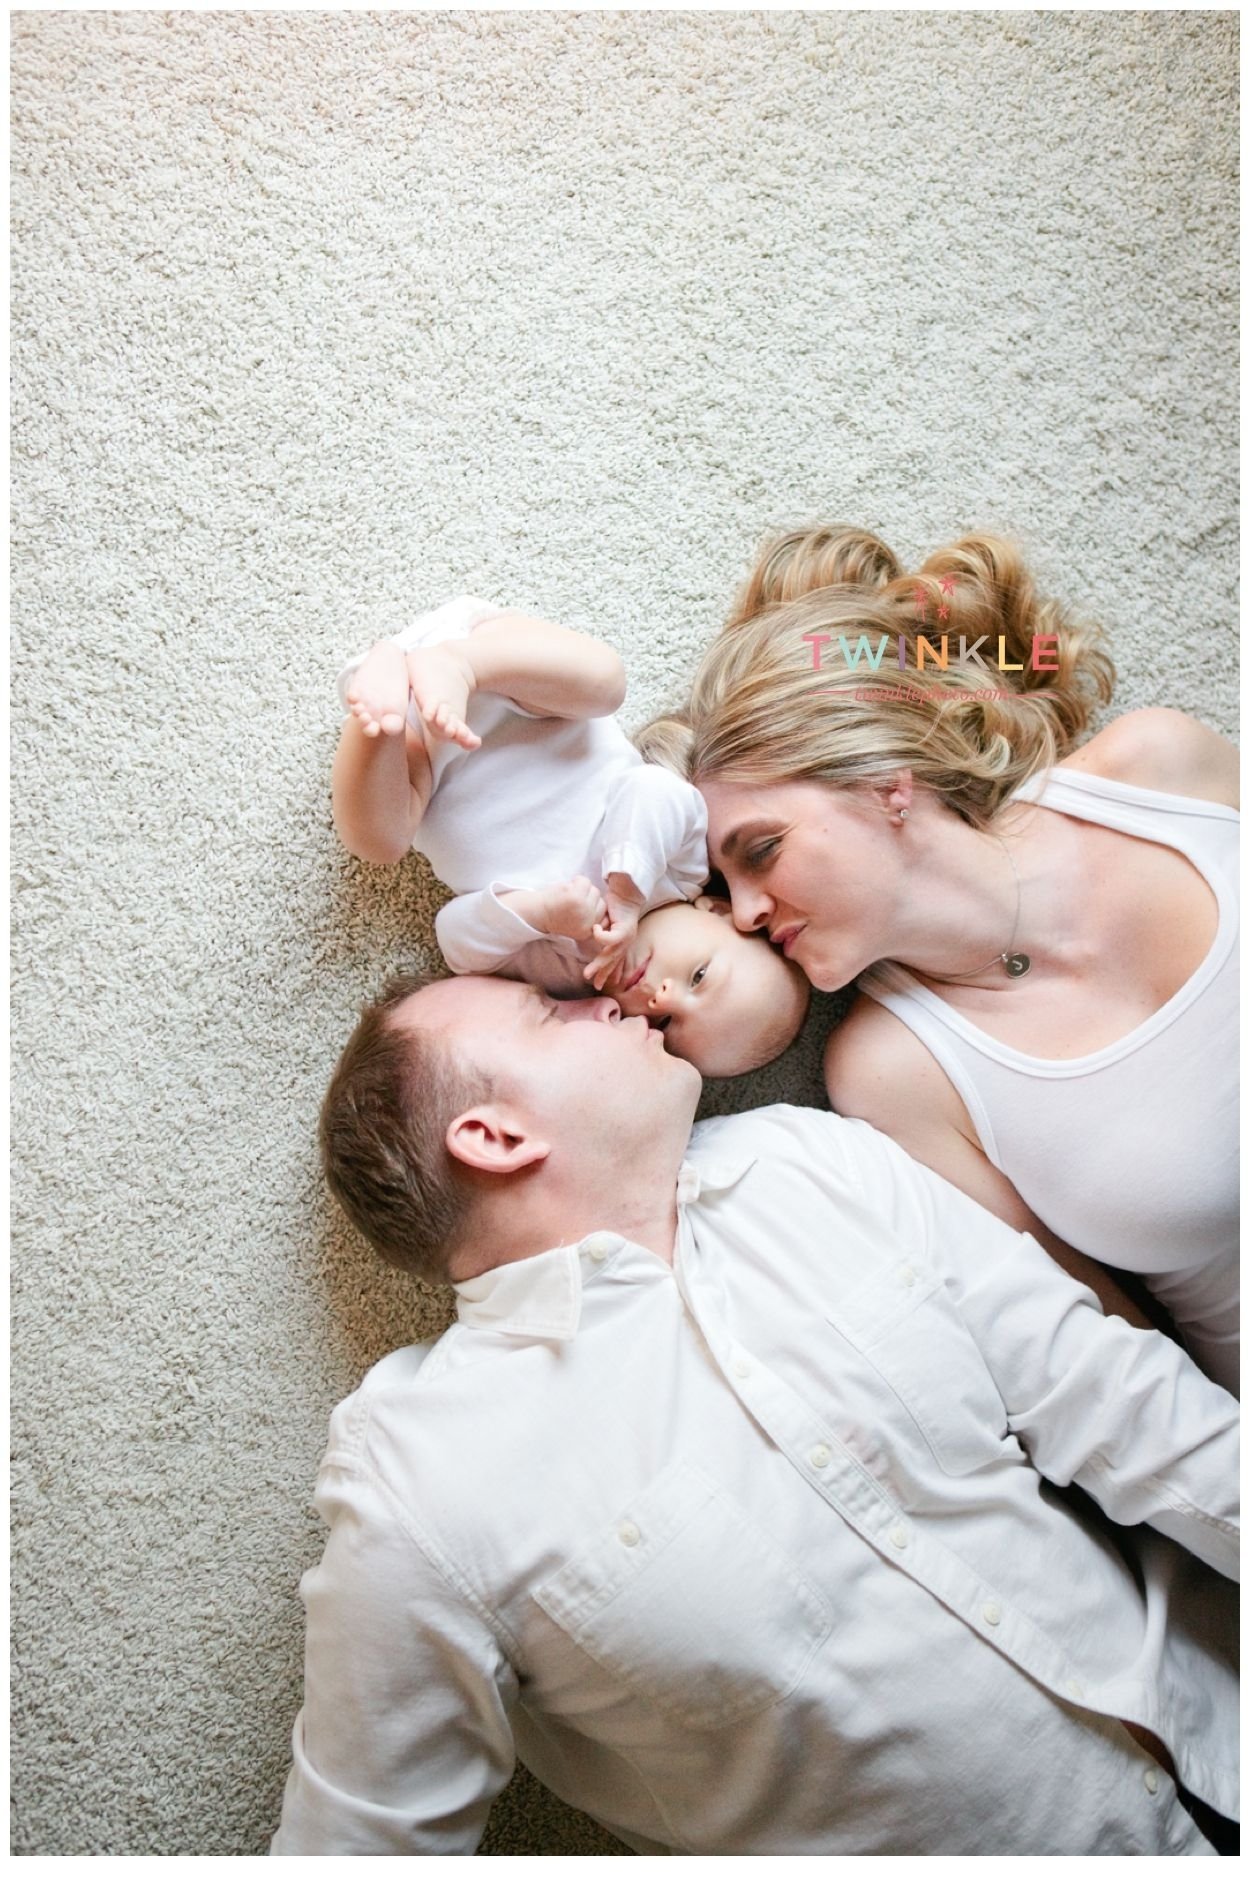 10 Fantastic 3 Month Old Photo Ideas mom and dad with 3 month old boy www twinklephoto photography 1 2022